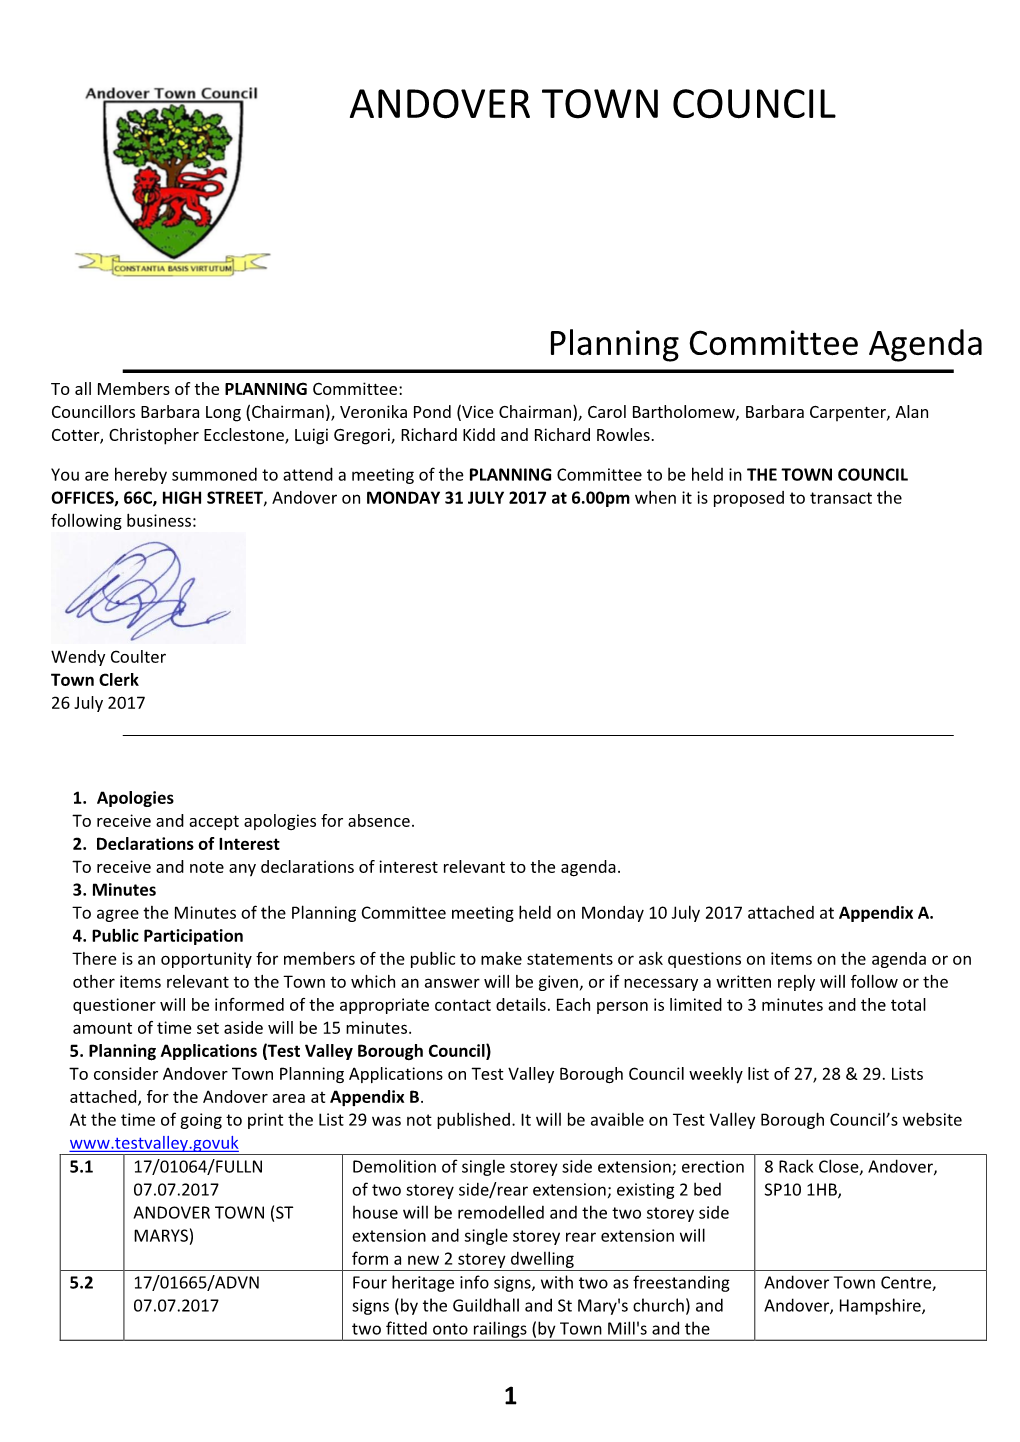 Andover Town Council Planning Committee Minutes – 10 July 2017